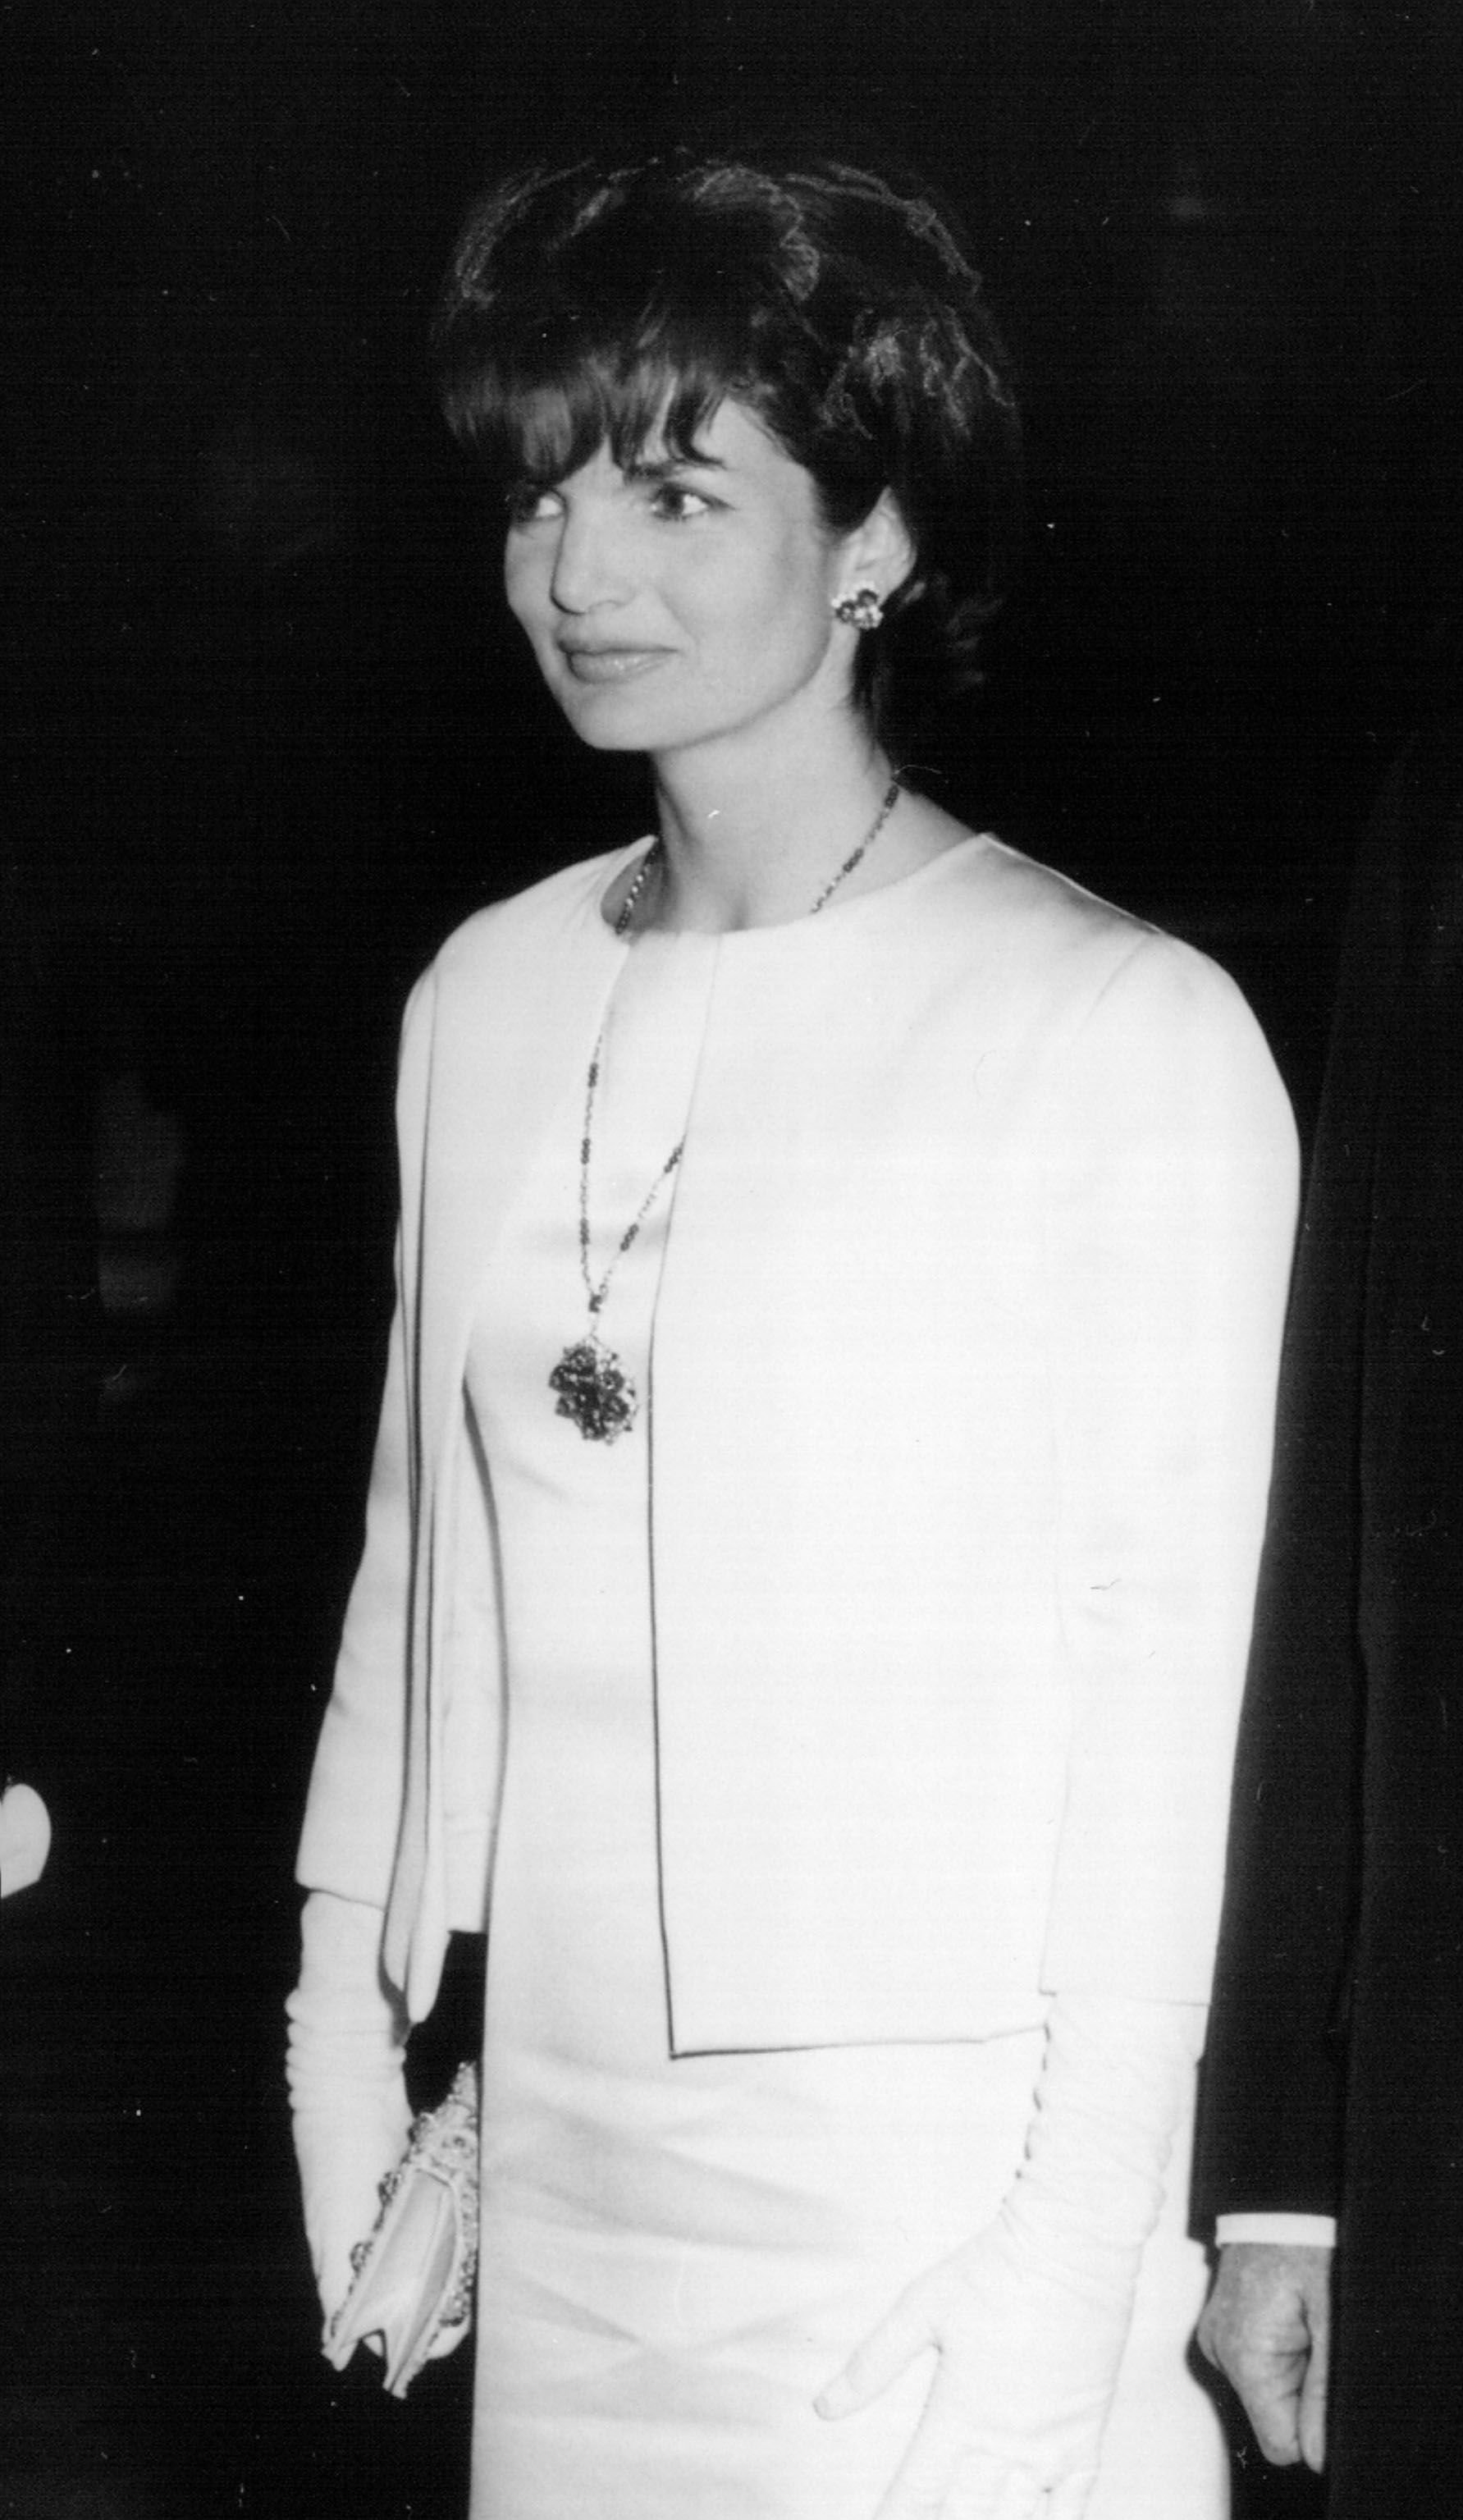 Lady Jackie Kennedy attends a White House Ceremony December 6, 1962 in Washington, DC. | Source: Getty Images